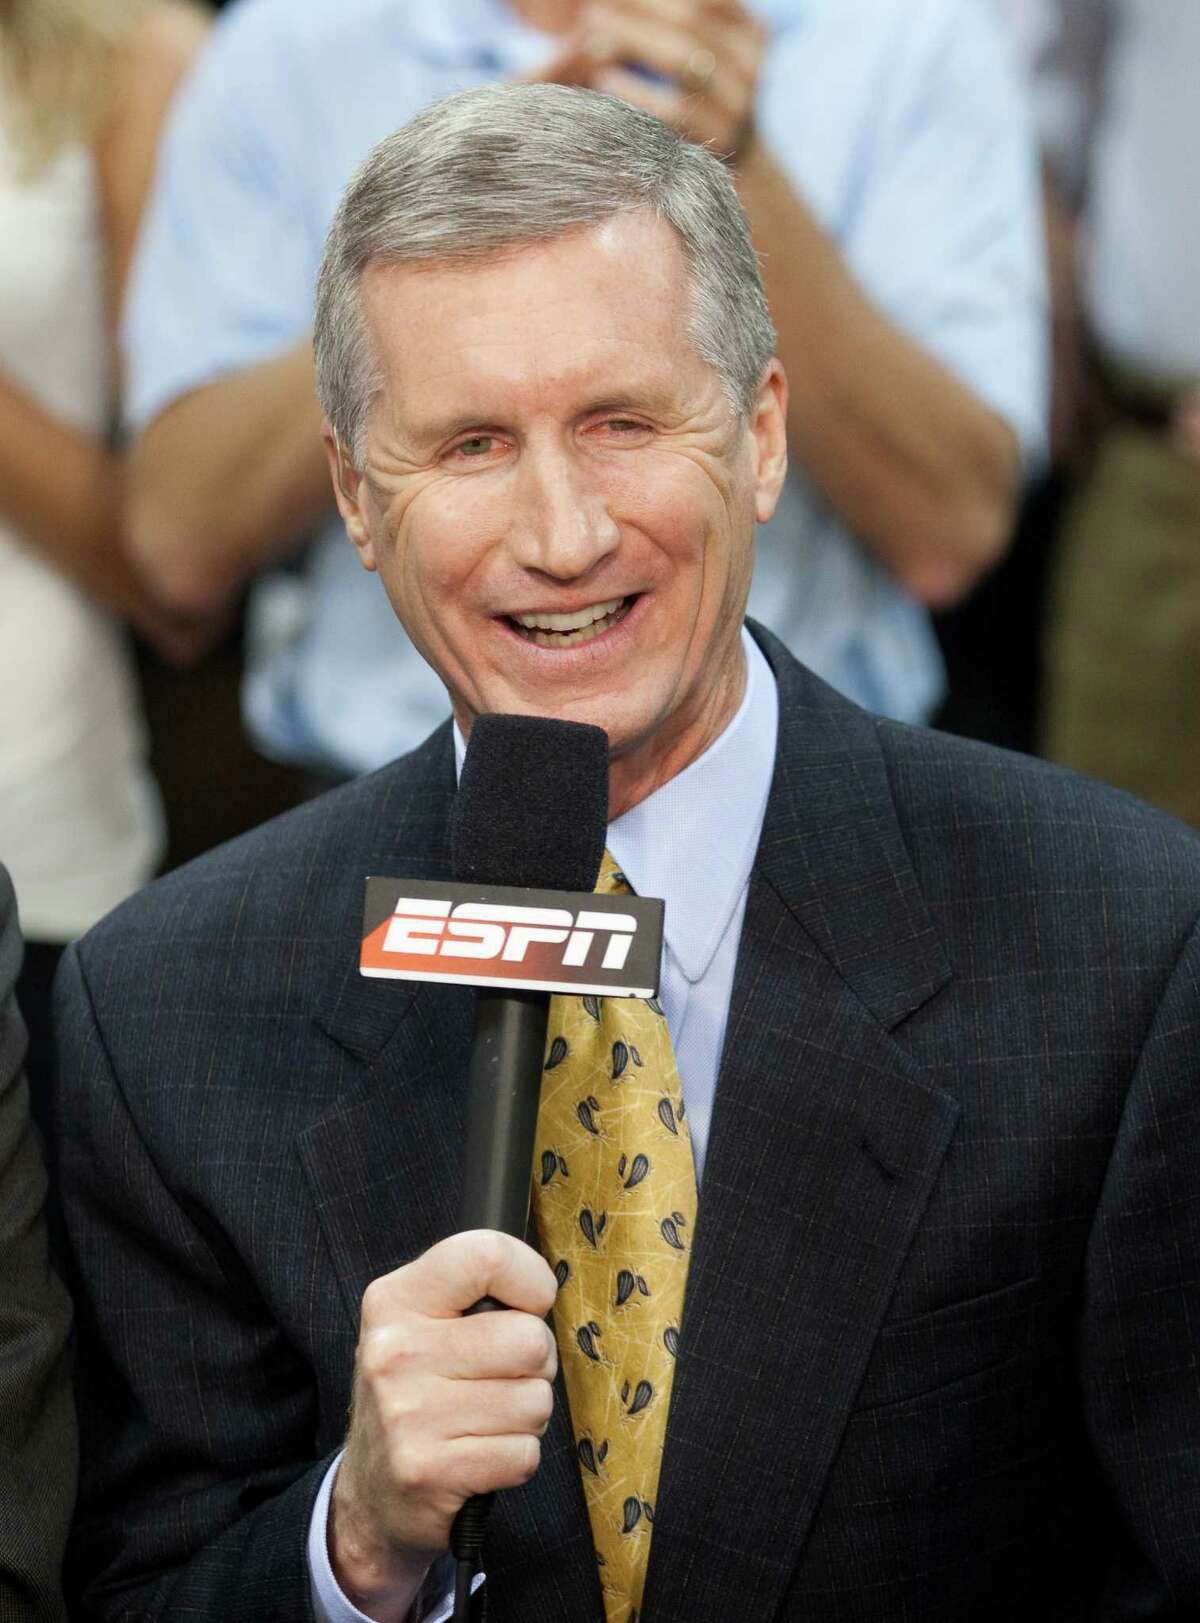 ESPN's Mike Breen calls his 100th NBA Finals broadcast in Game 5